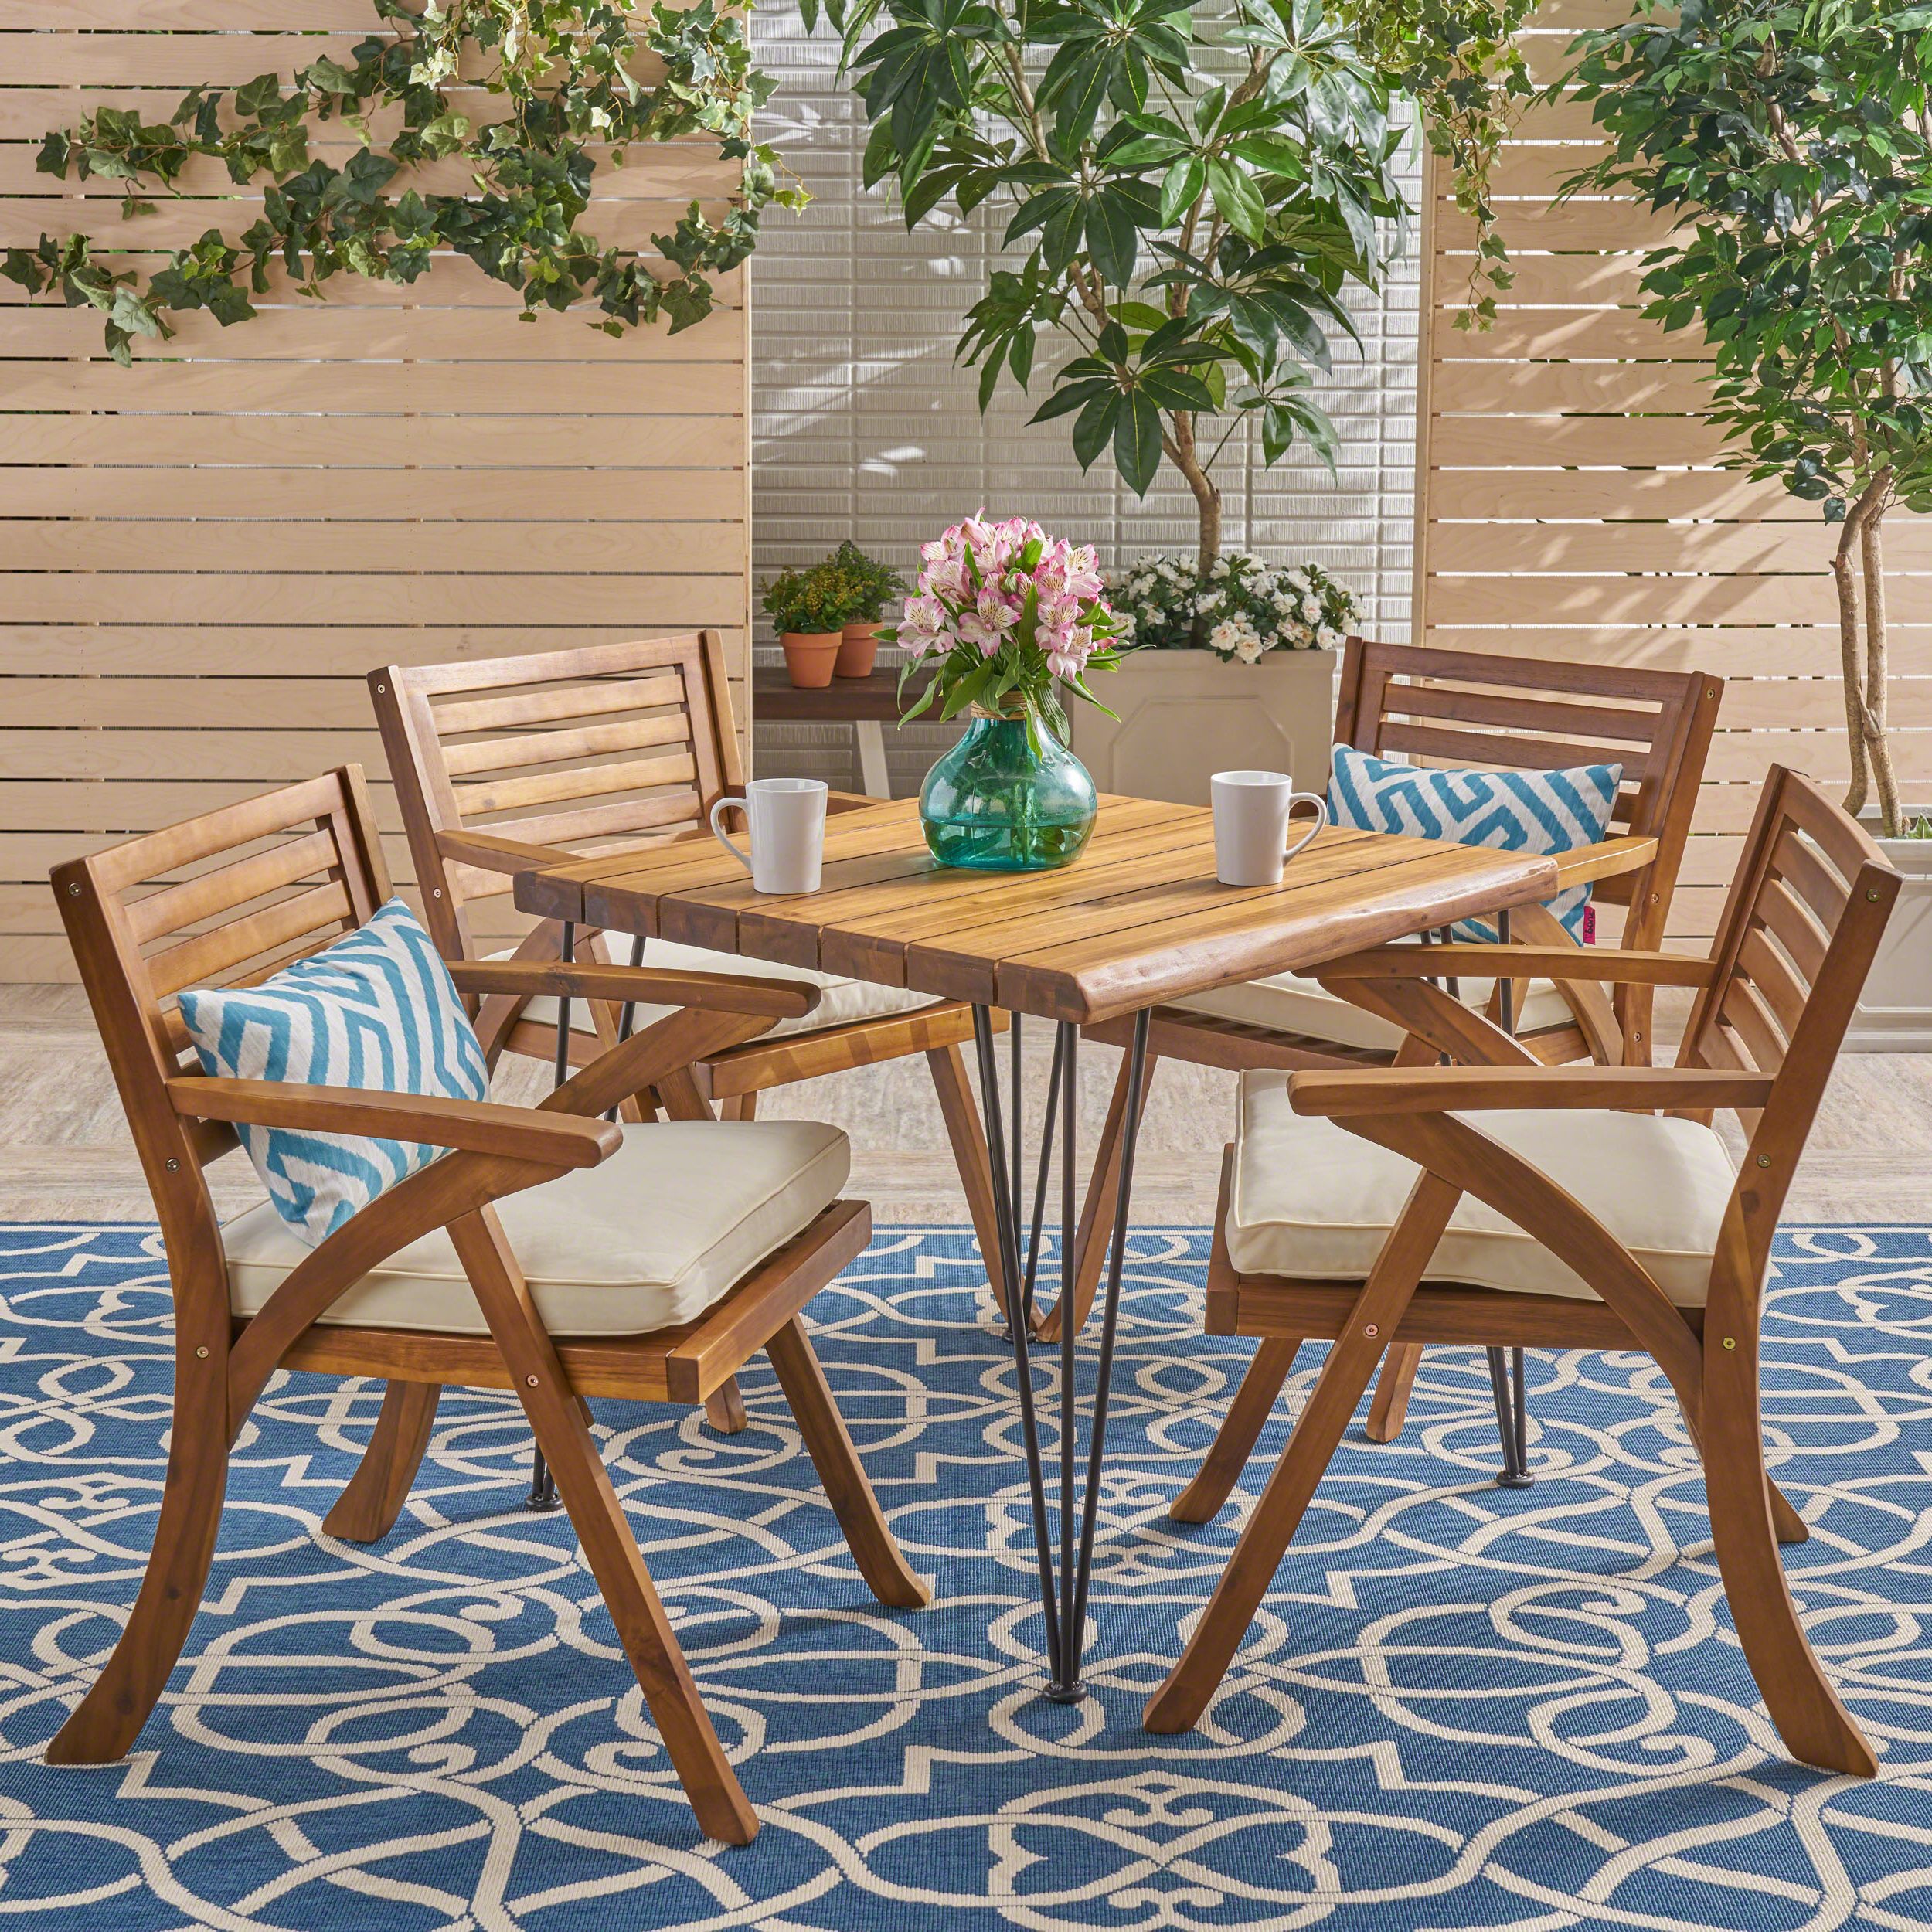 Trendy Lane Outdoor Industrial Wood And Wicker 5 Piece Square Dining Set, Teak Inside Teak Wicker Outdoor Dining Sets (View 7 of 15)